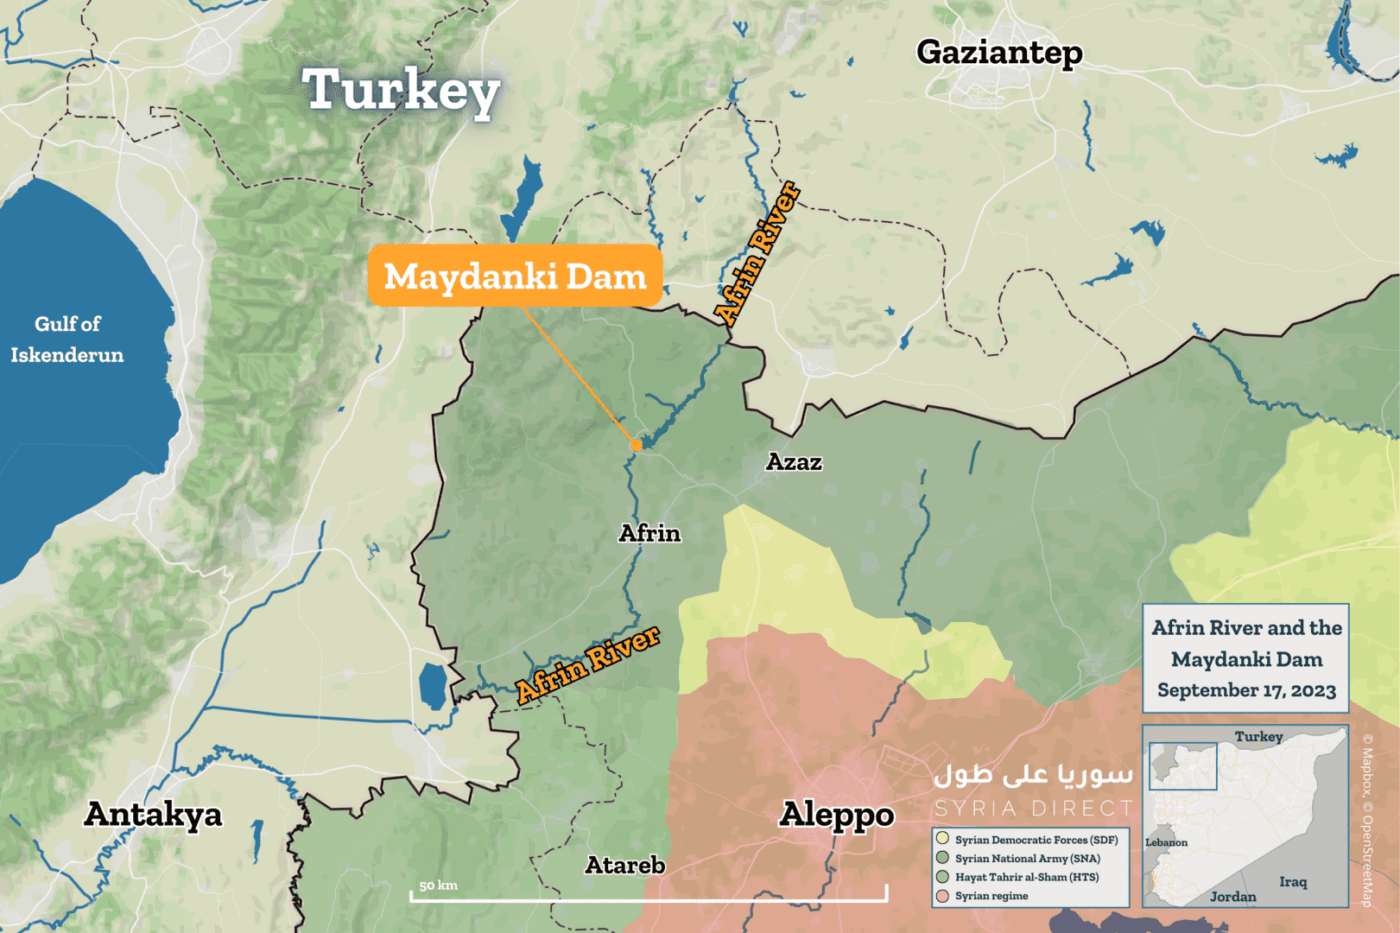 A map of the Afrin River and Maydanki Dam in Syria’s northwestern Aleppo province (Syria Direct)